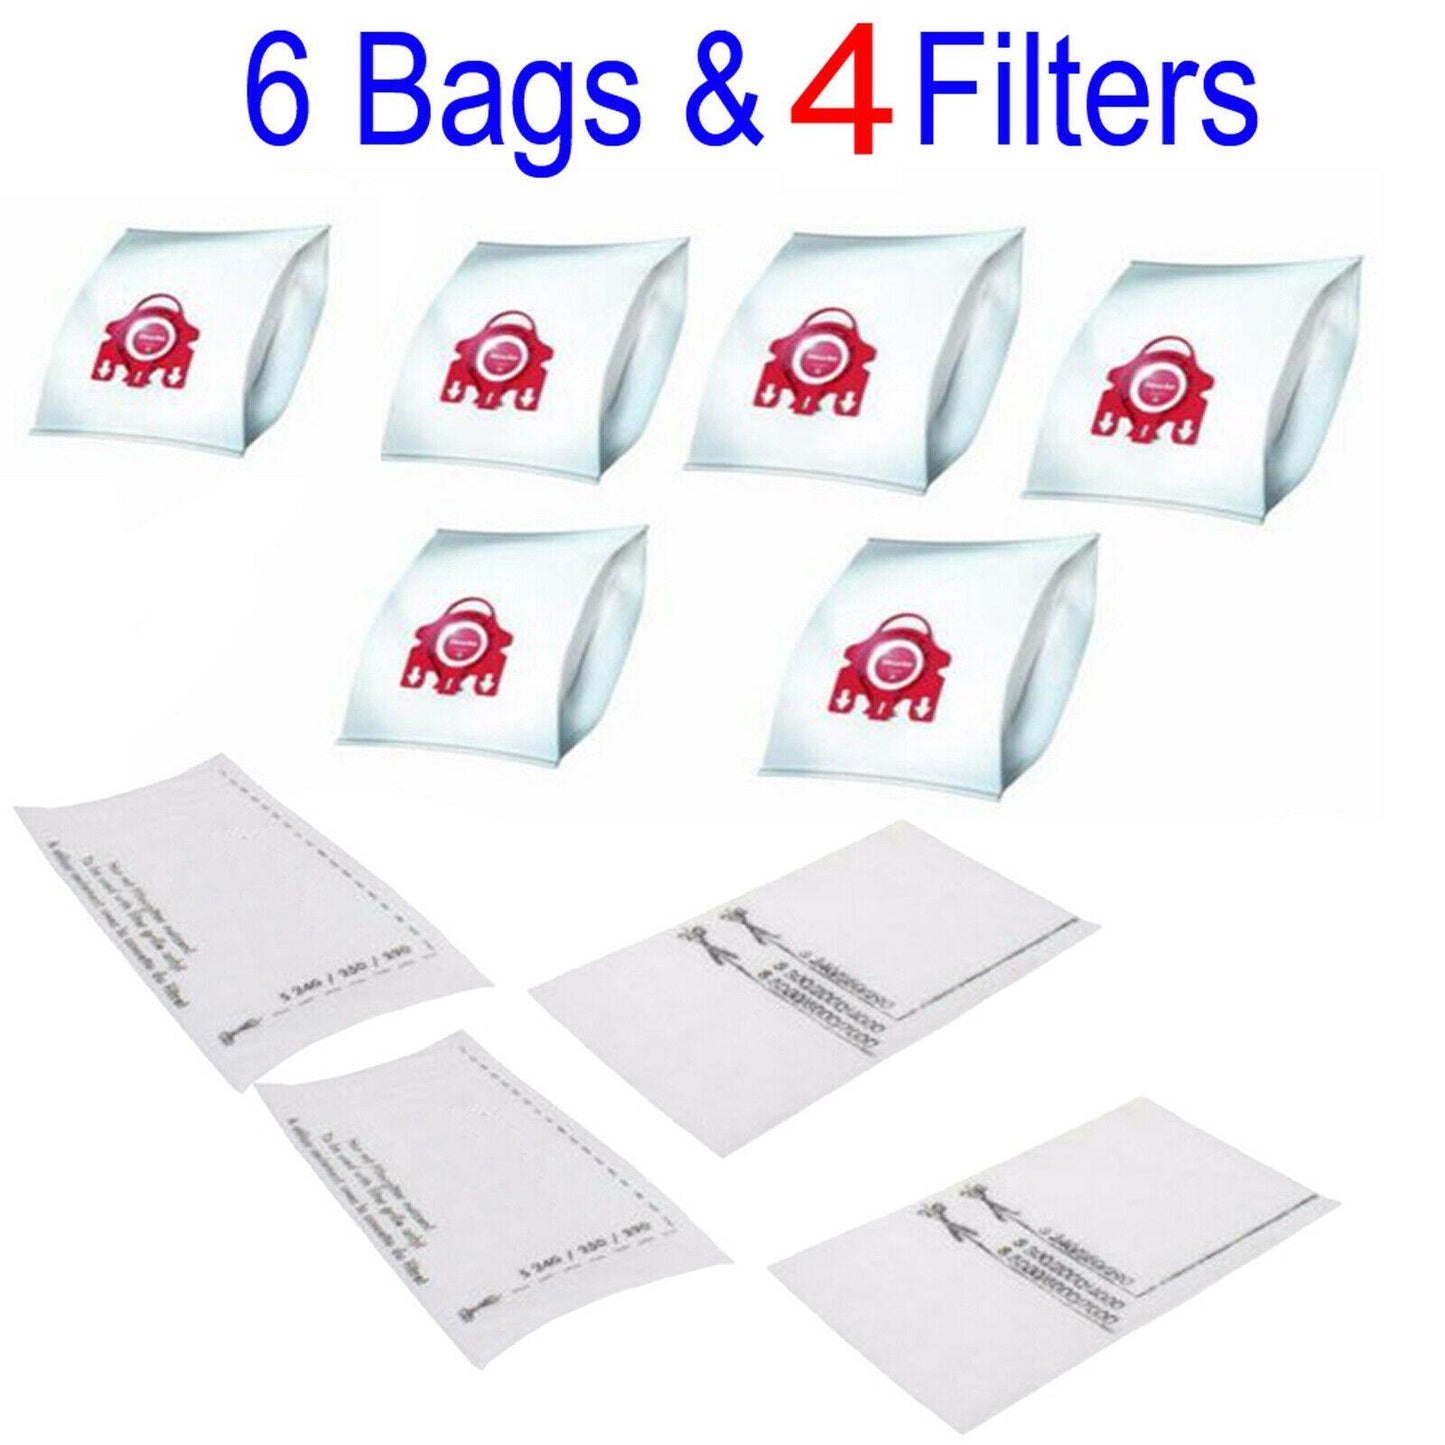 6 Dust Bags & 4 Filters For Miele FJM Hyclean C1 C2 S4 S6 S290 S381 S6210 S514 Sparesbarn